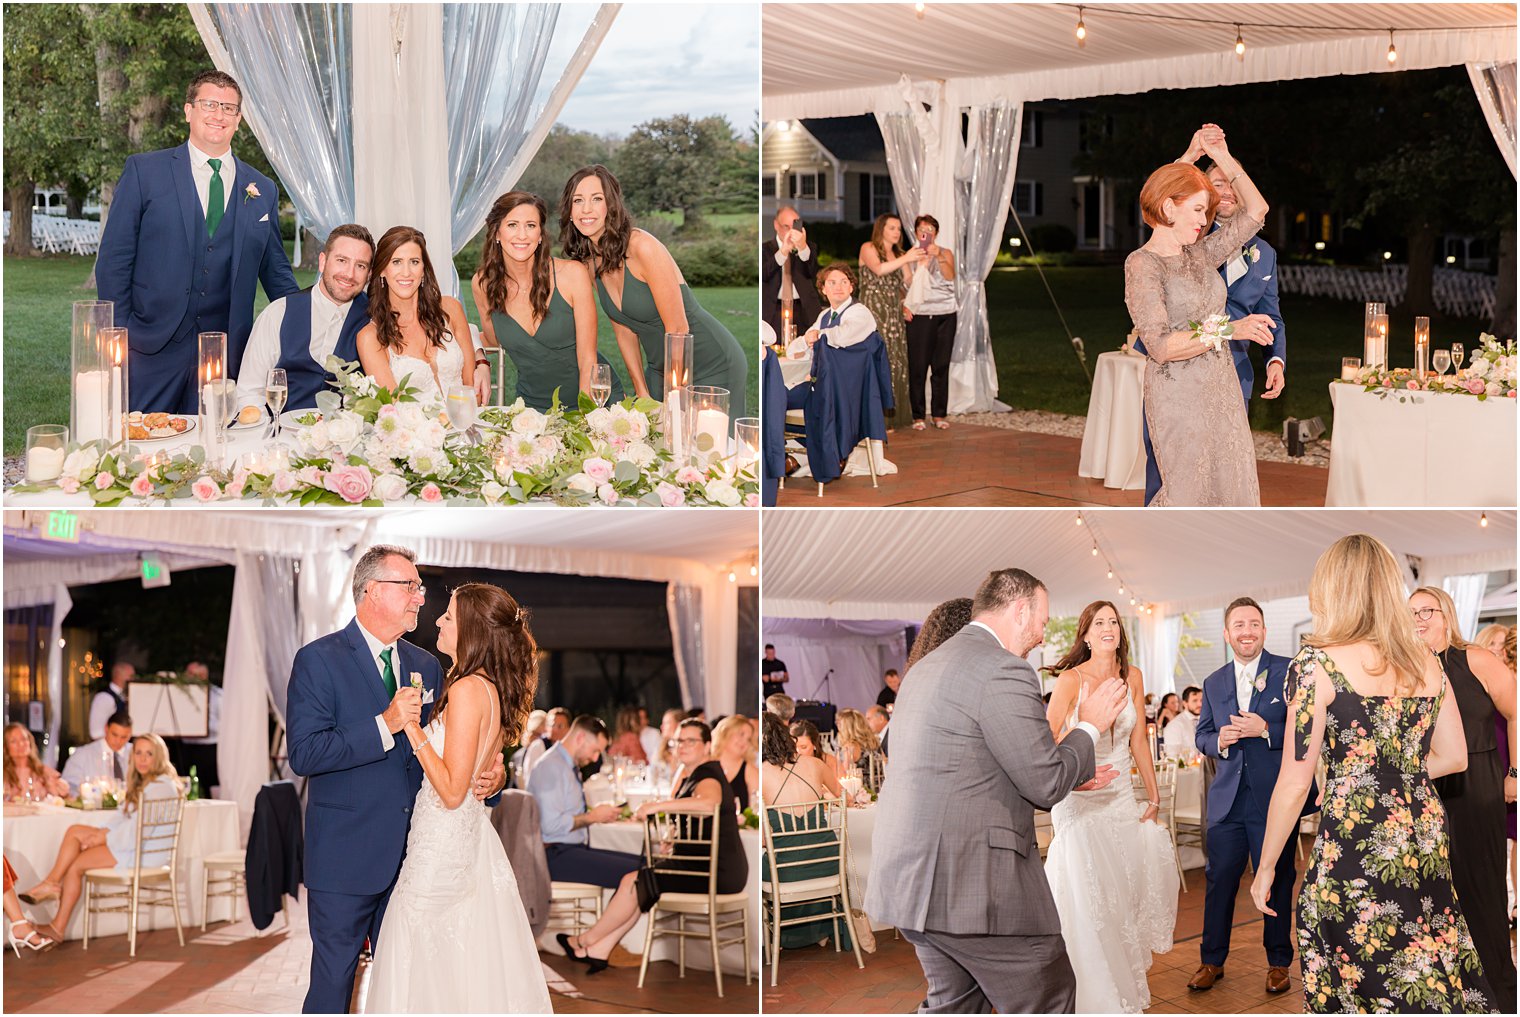 newlyweds dance with parents and guests during Princeton NJ wedding reception